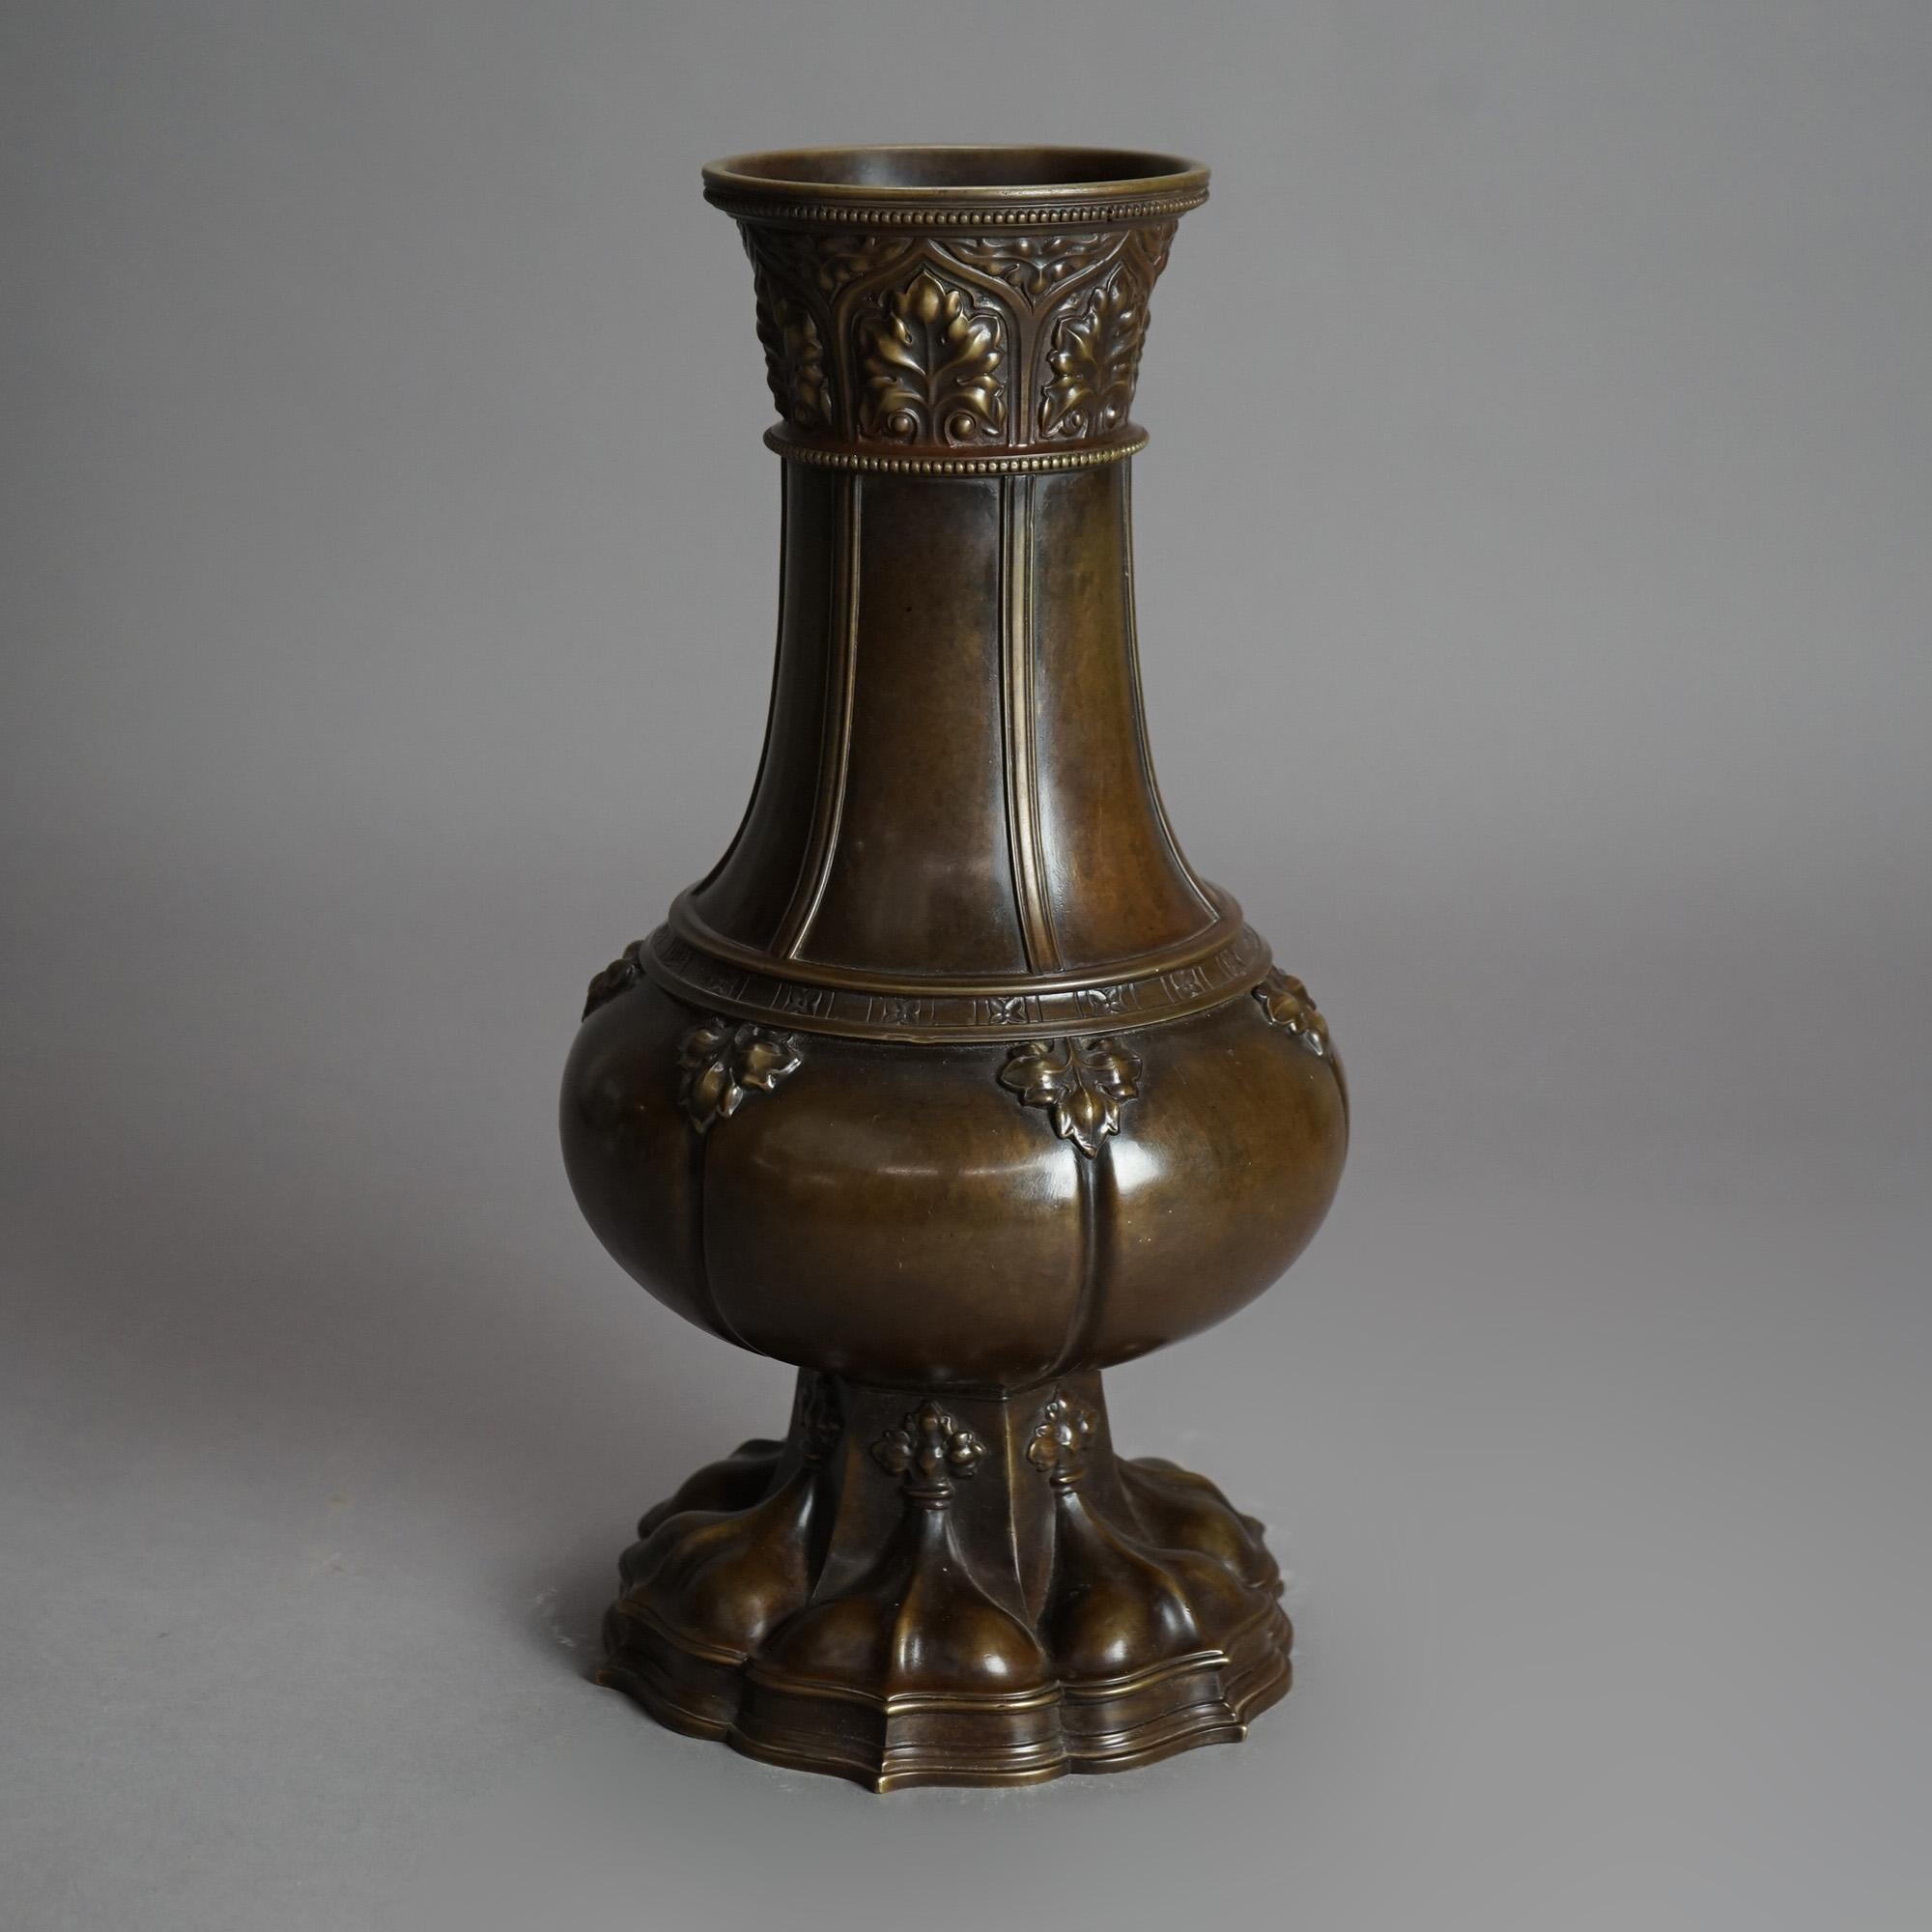 An antique Chinese form vase by Goham offers cast bronze construction with foliate elements, signed, c1900

Measures - 13.5